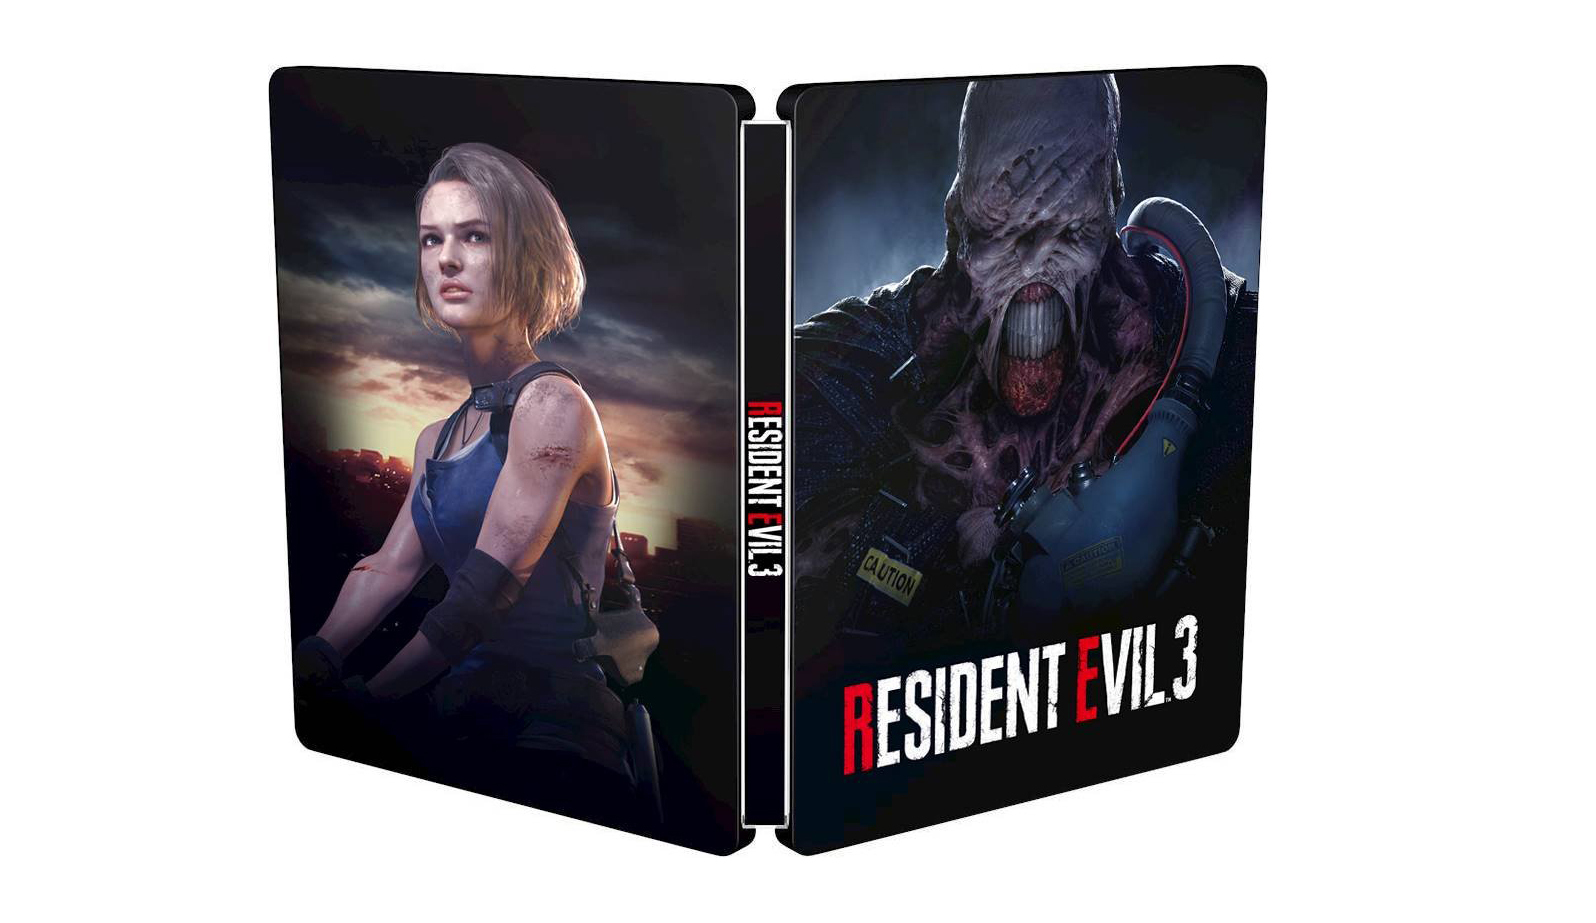 Resident Evil 3 Launch Guide: Where To Buy, Deals, Steelbook Edition, And  More - GameSpot